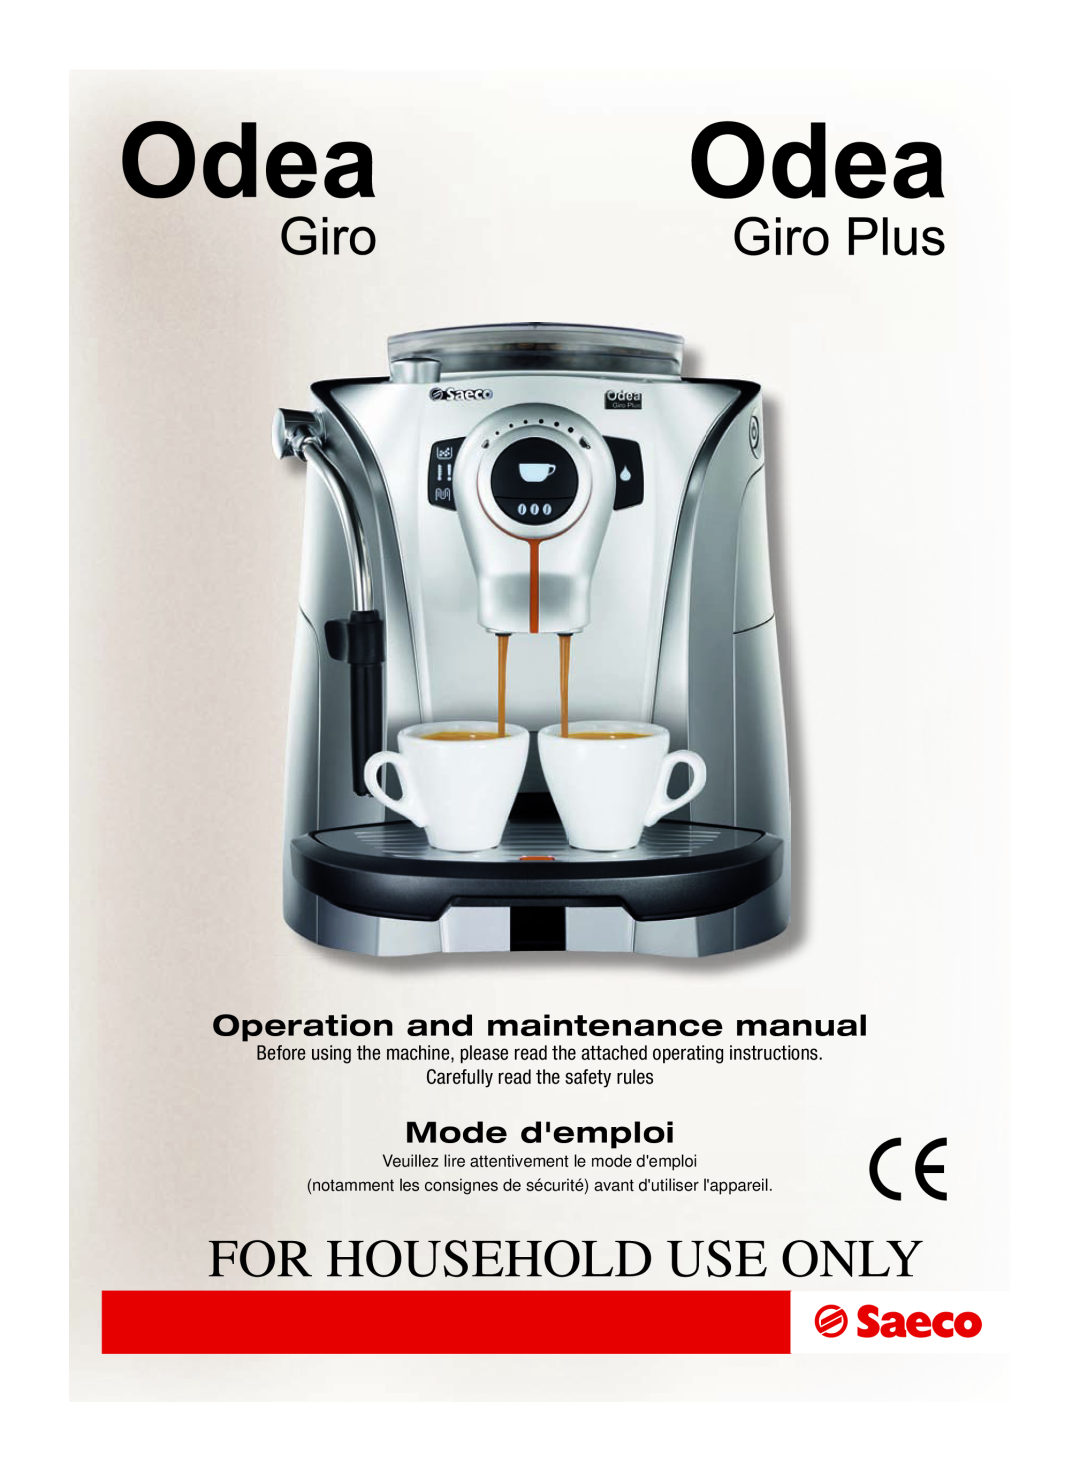 Saeco Coffee Makers GIRO PRO, Odea Giro manual For Household Use Only, Operation and maintenance manual, Mode demploi 